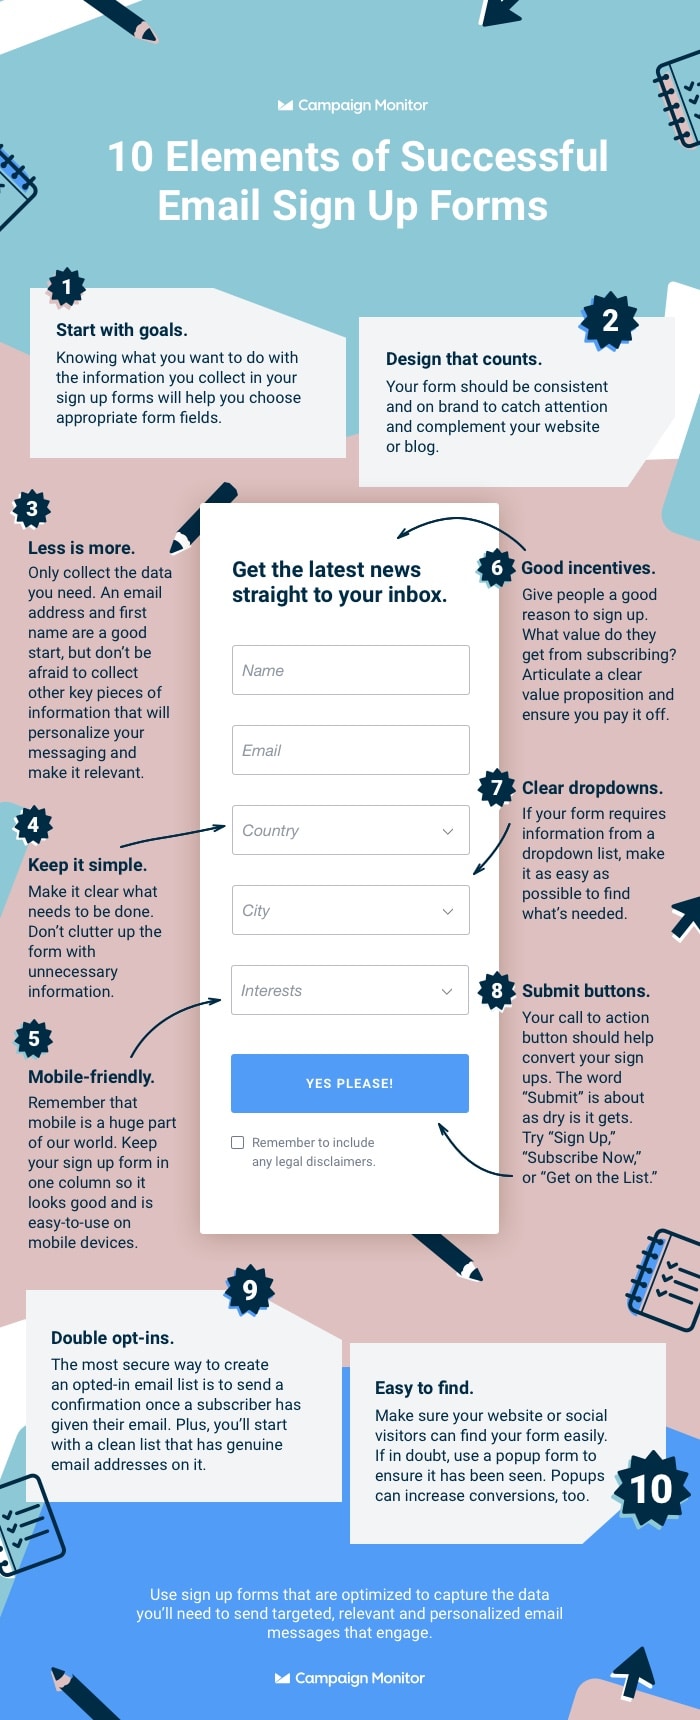 how to build an email list - infographic about signup forms